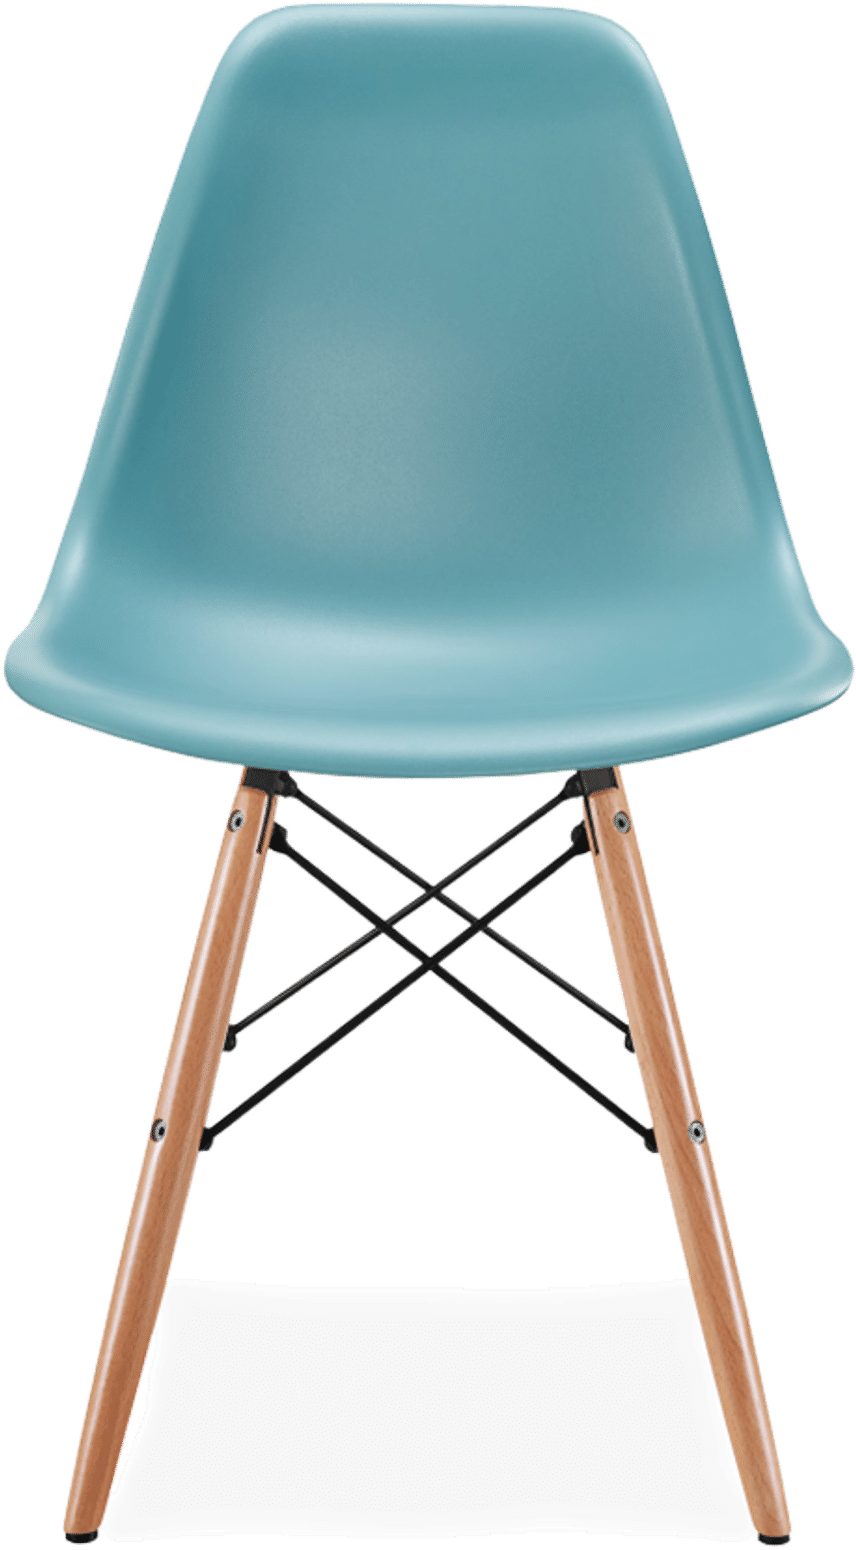 DSW Style Chair Teal/Light Wood image.